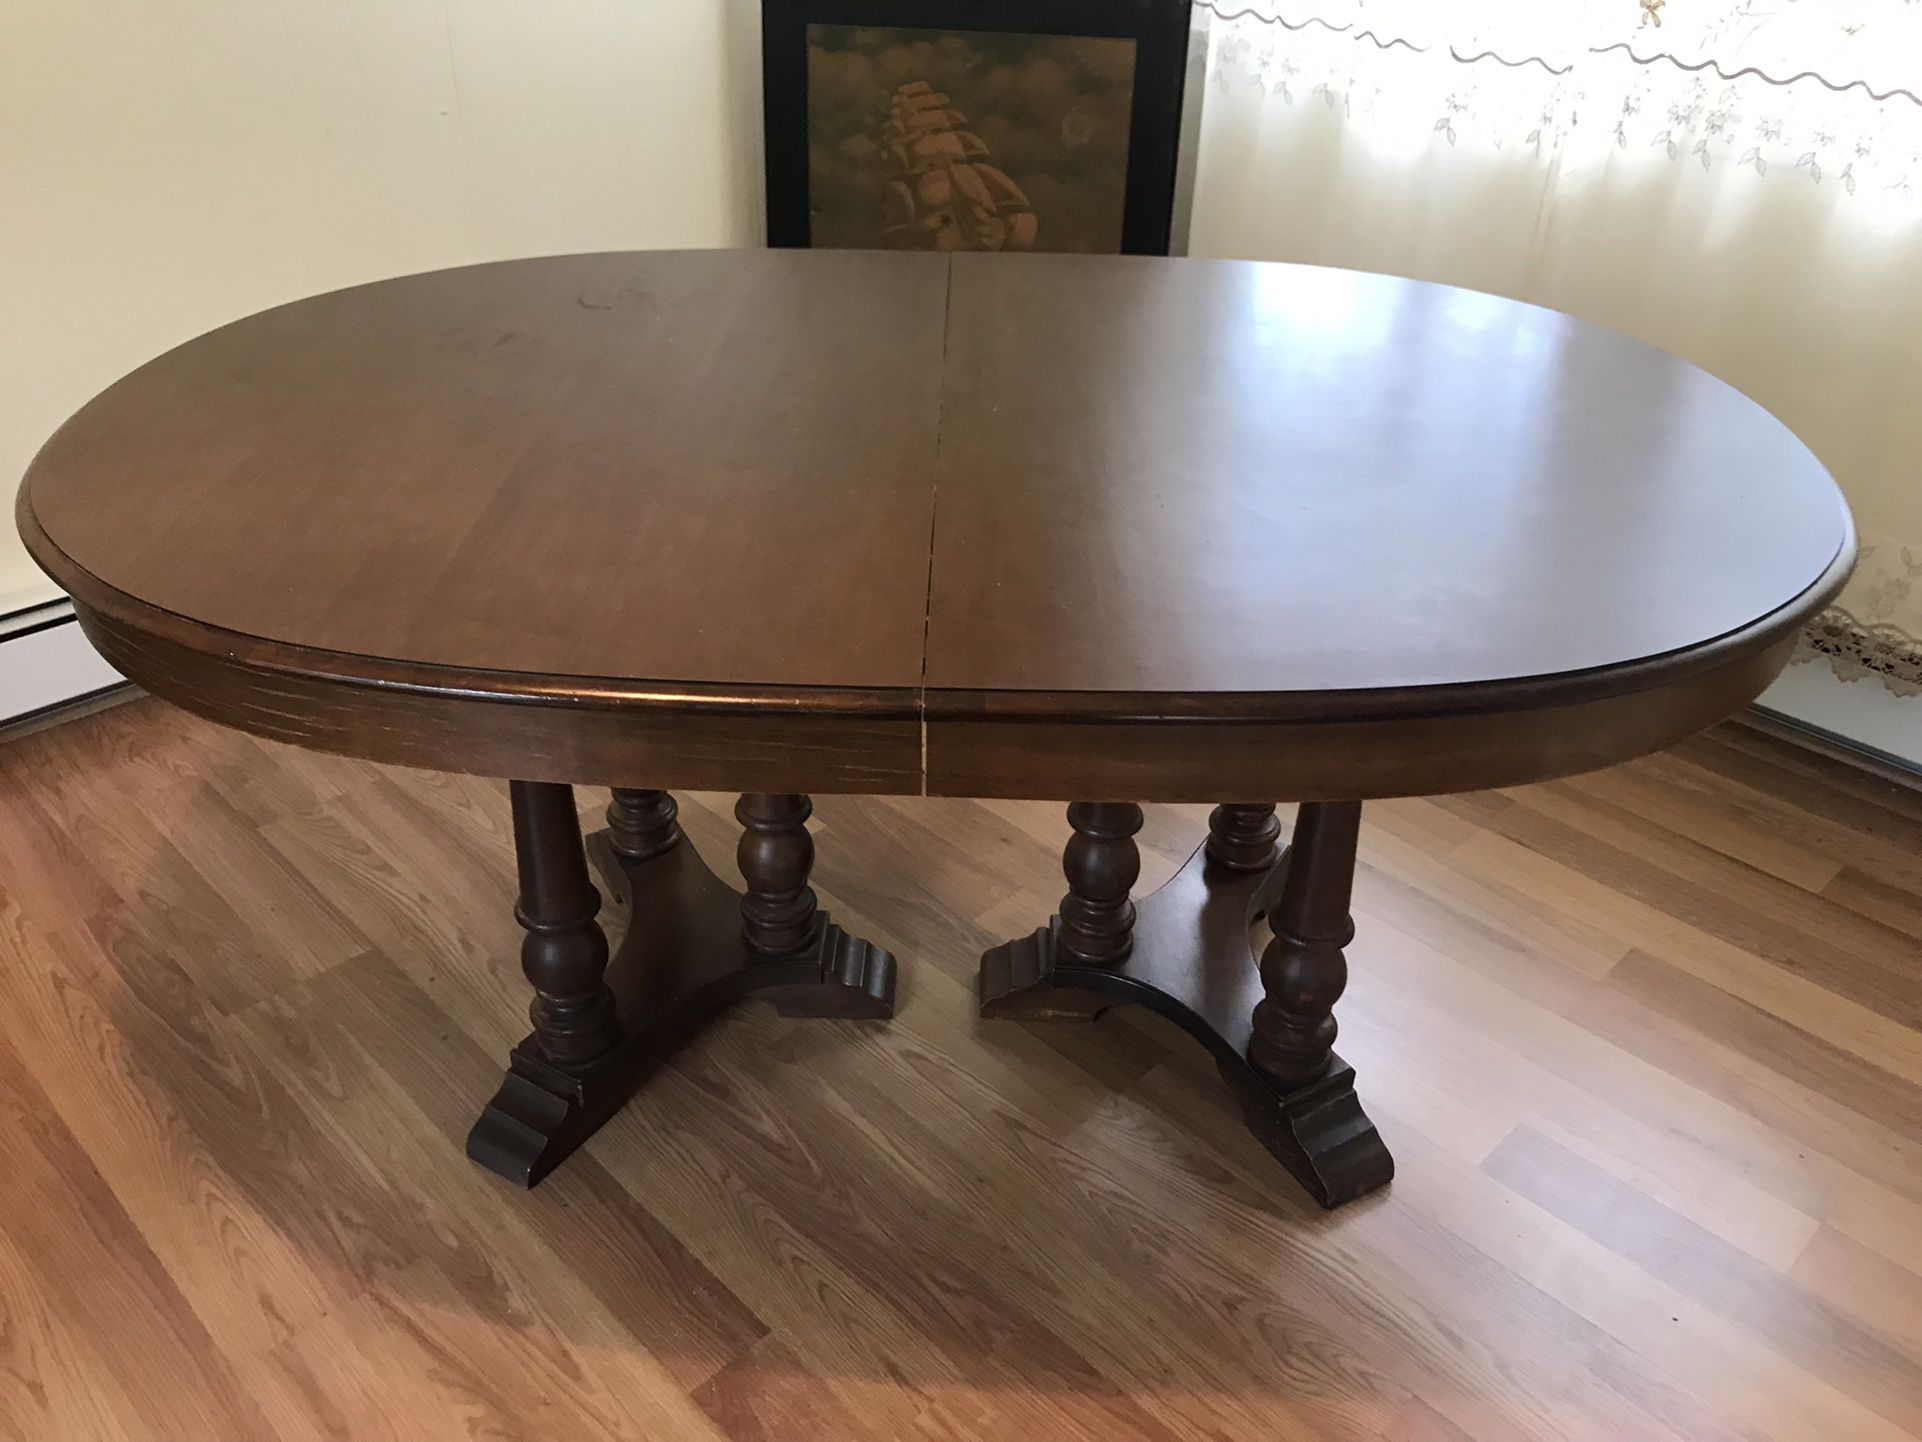 Solid wood dining room set 5 feet extension 17 inches six chairs phone number (contact info removed)